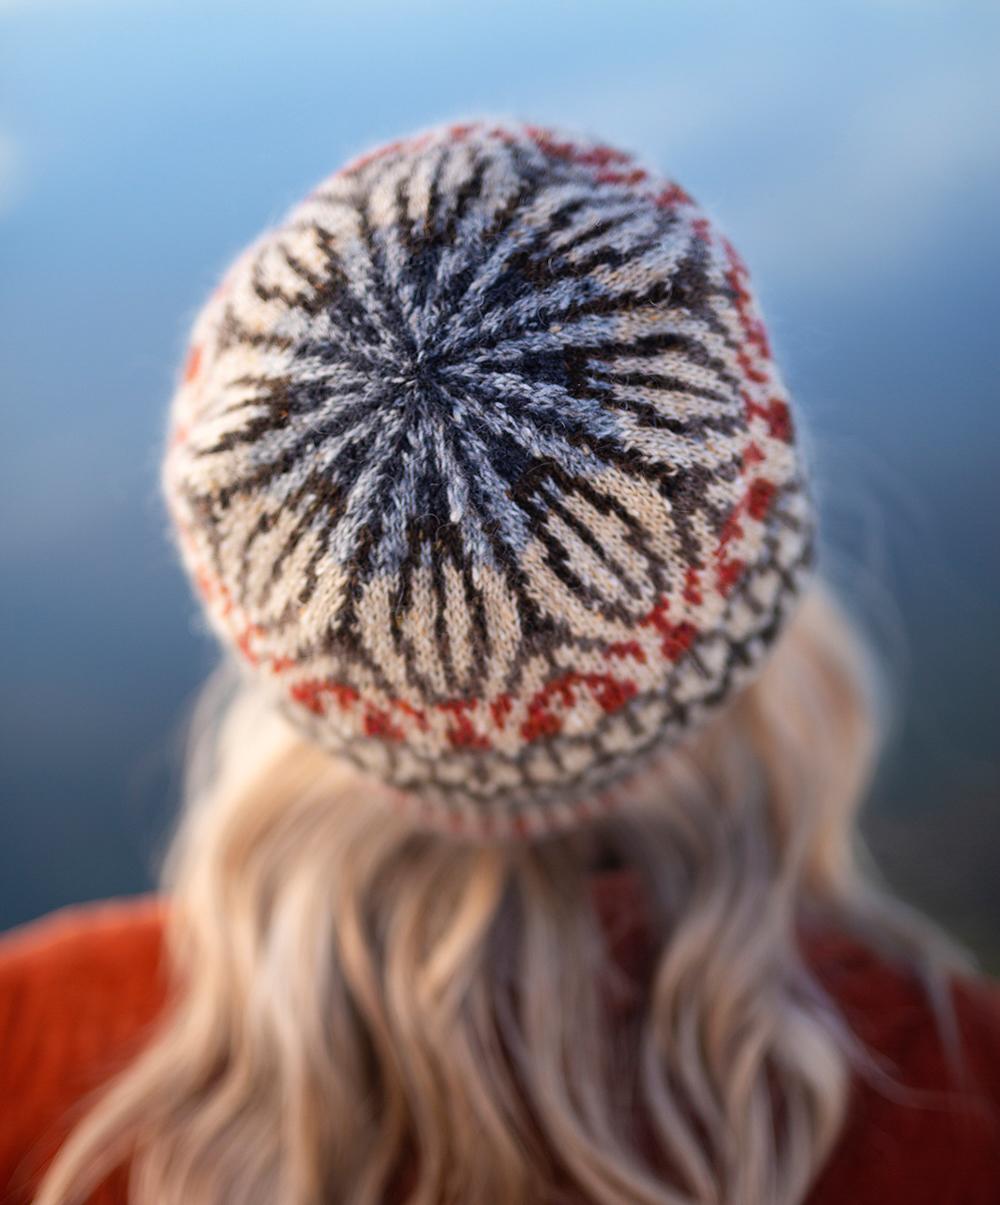 Jane Hunter Models Featherheid - a stranded colourwork hat design based on duck plumage; the background is blue with lochs and skylines